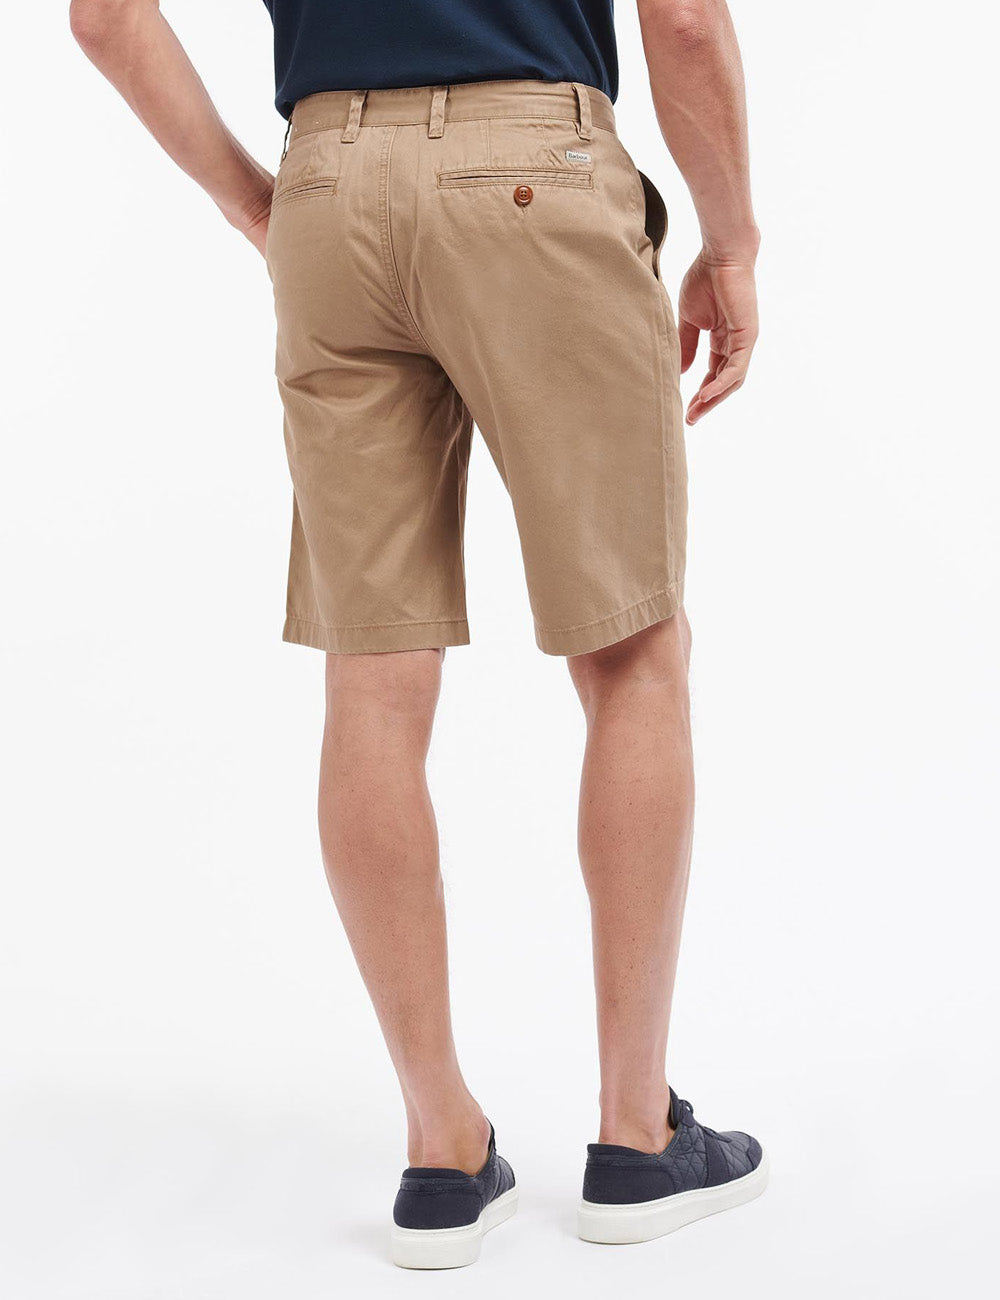 Image of man wearing the Neuston Shorts from the back